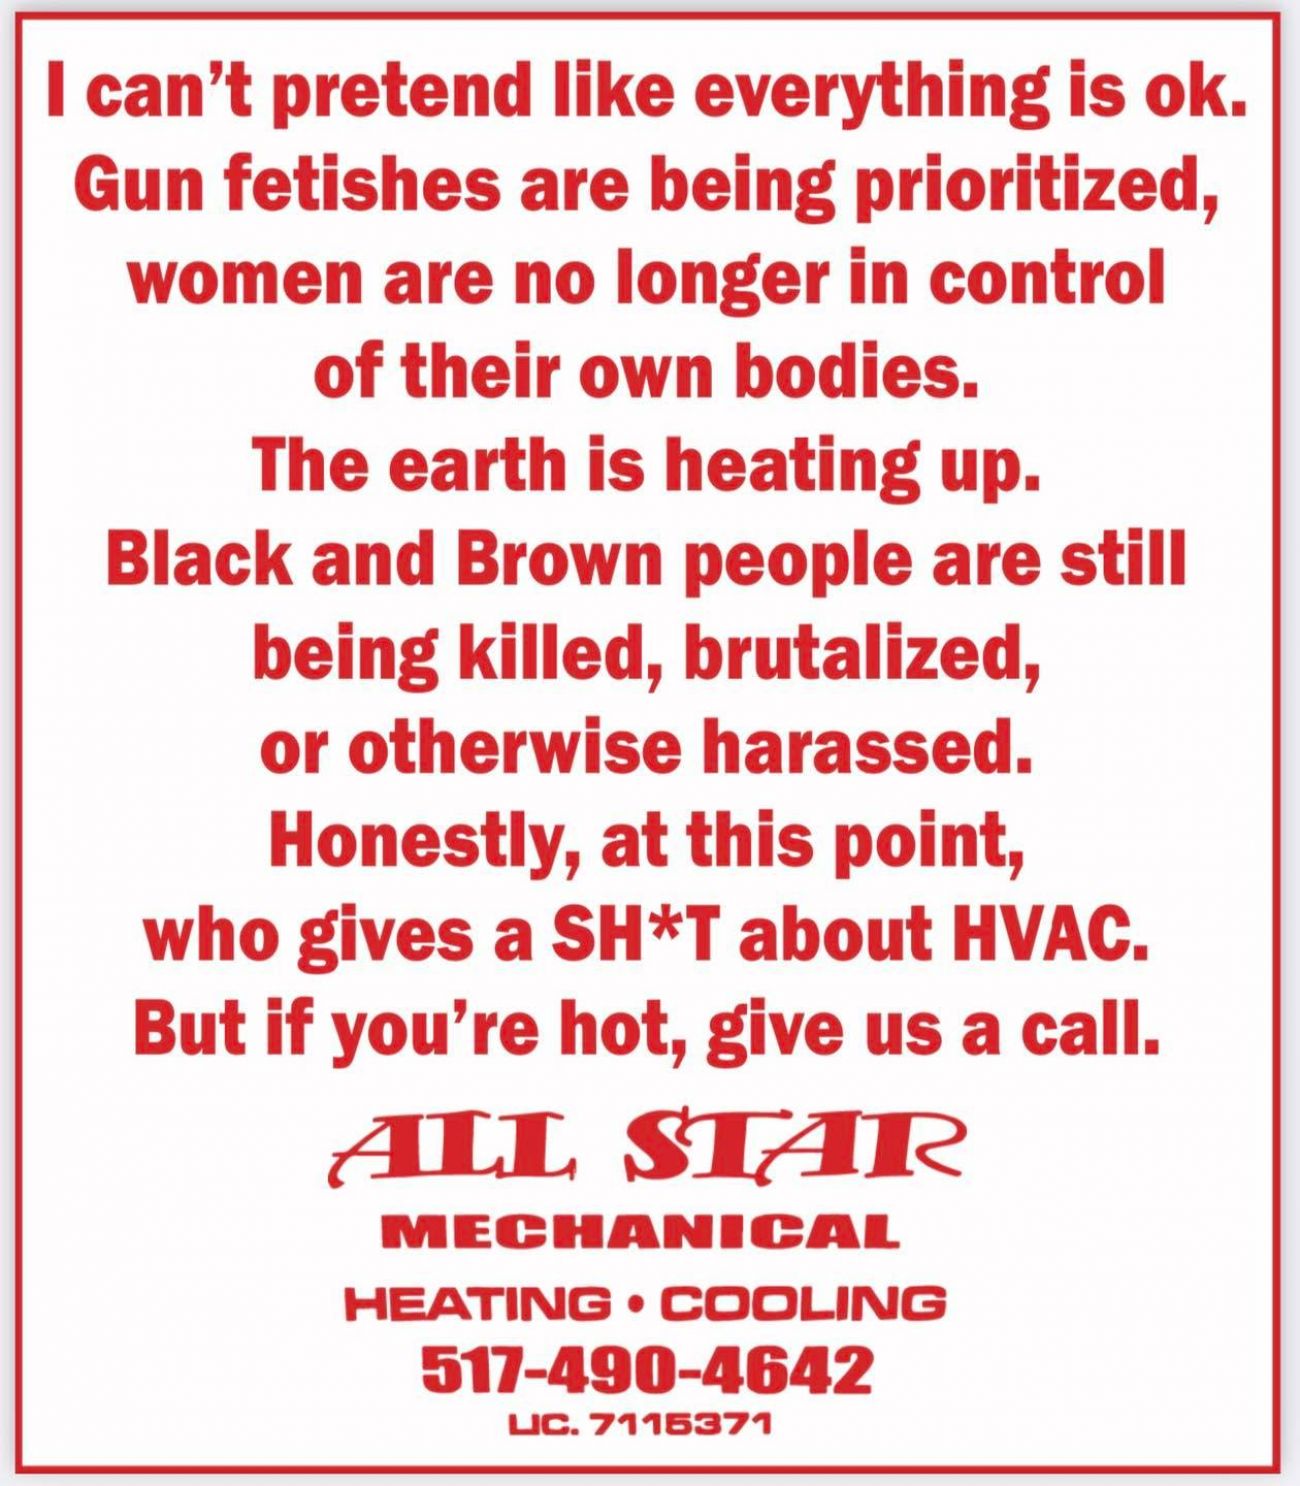 the ad in the newspaper. It reads “I can’t pretend like everything is ok. Gun fetishes are being prioritized, women are no longer in control of their own bodies. The earth is heating up. Black and Brown people are still being killed, brutalized, or otherwise harassed. Honestly, at this point, who gives a SH*T about HVAC. But if you’re hot, give us a call.” 